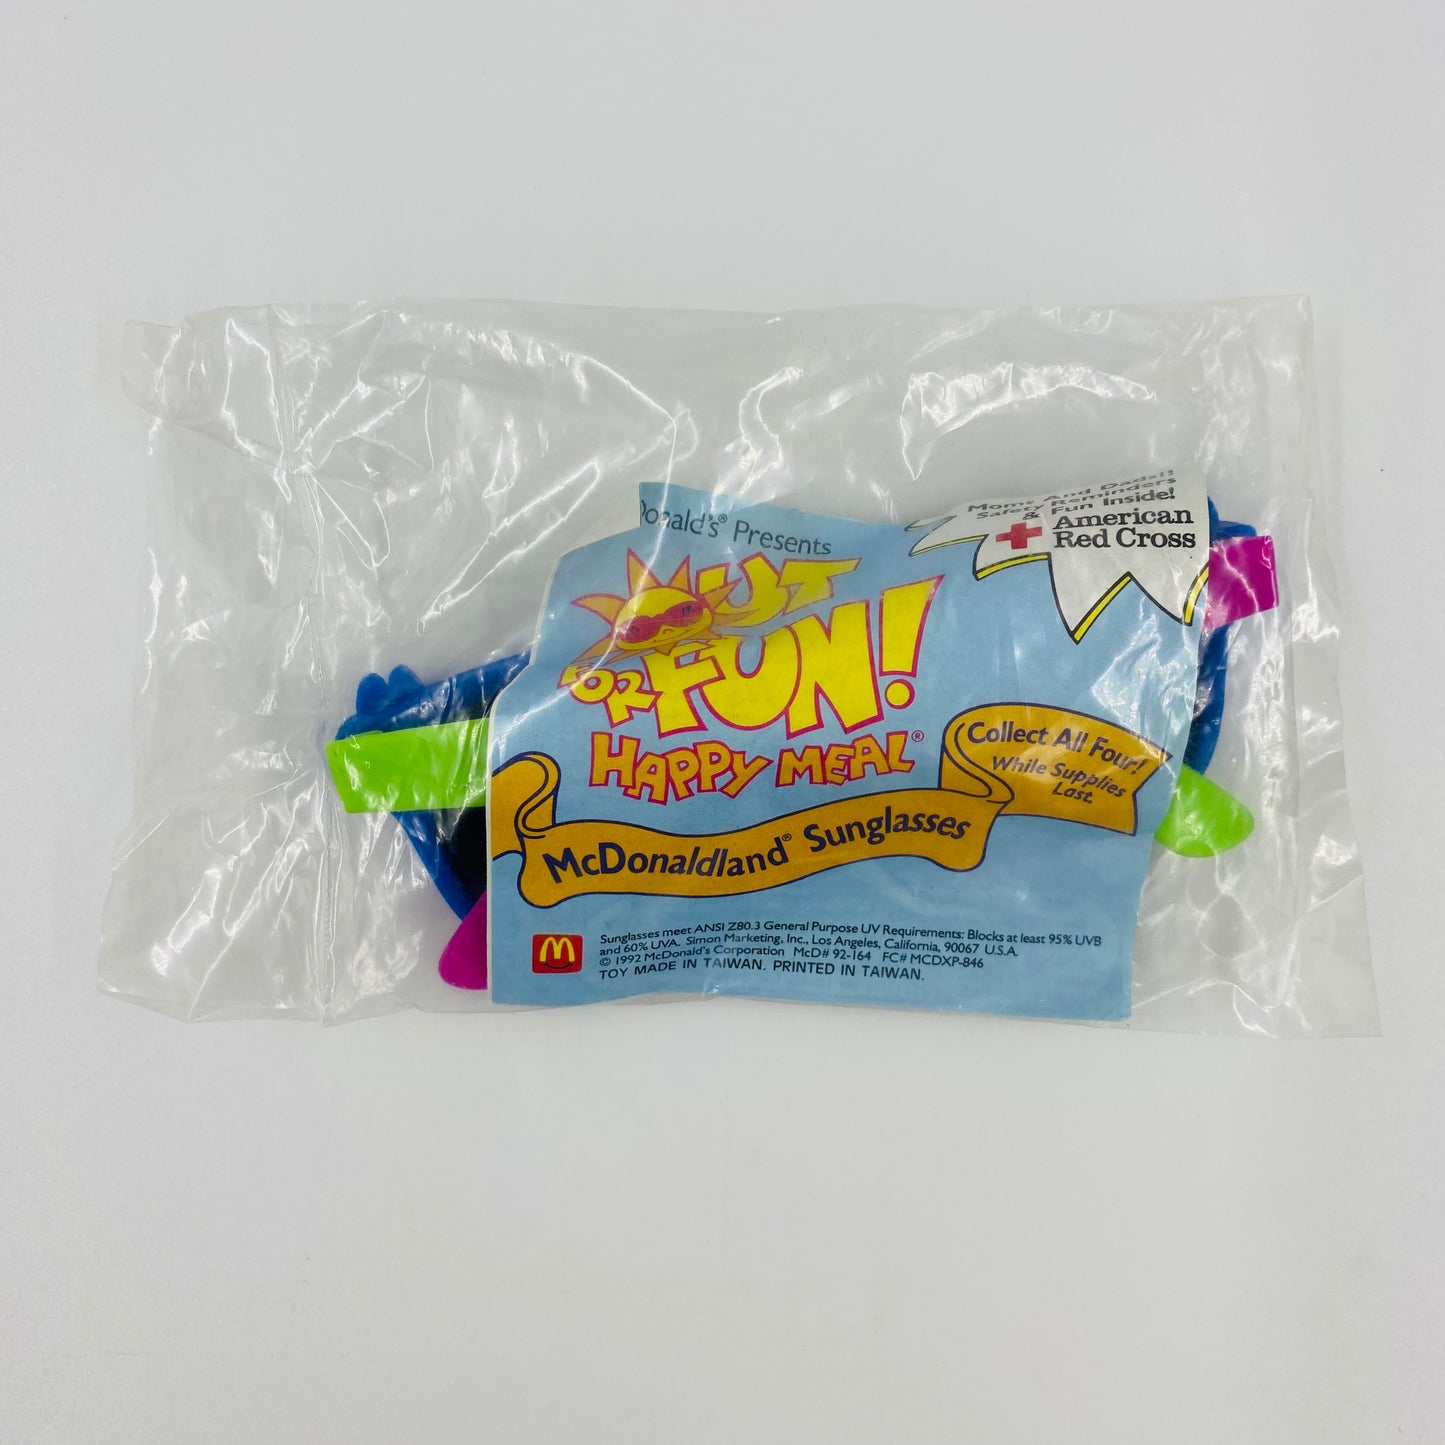 McDonald's Presents Out For Fun! McDonaldland Sunglasses McDonald's Happy Meal toy (1992) bagged